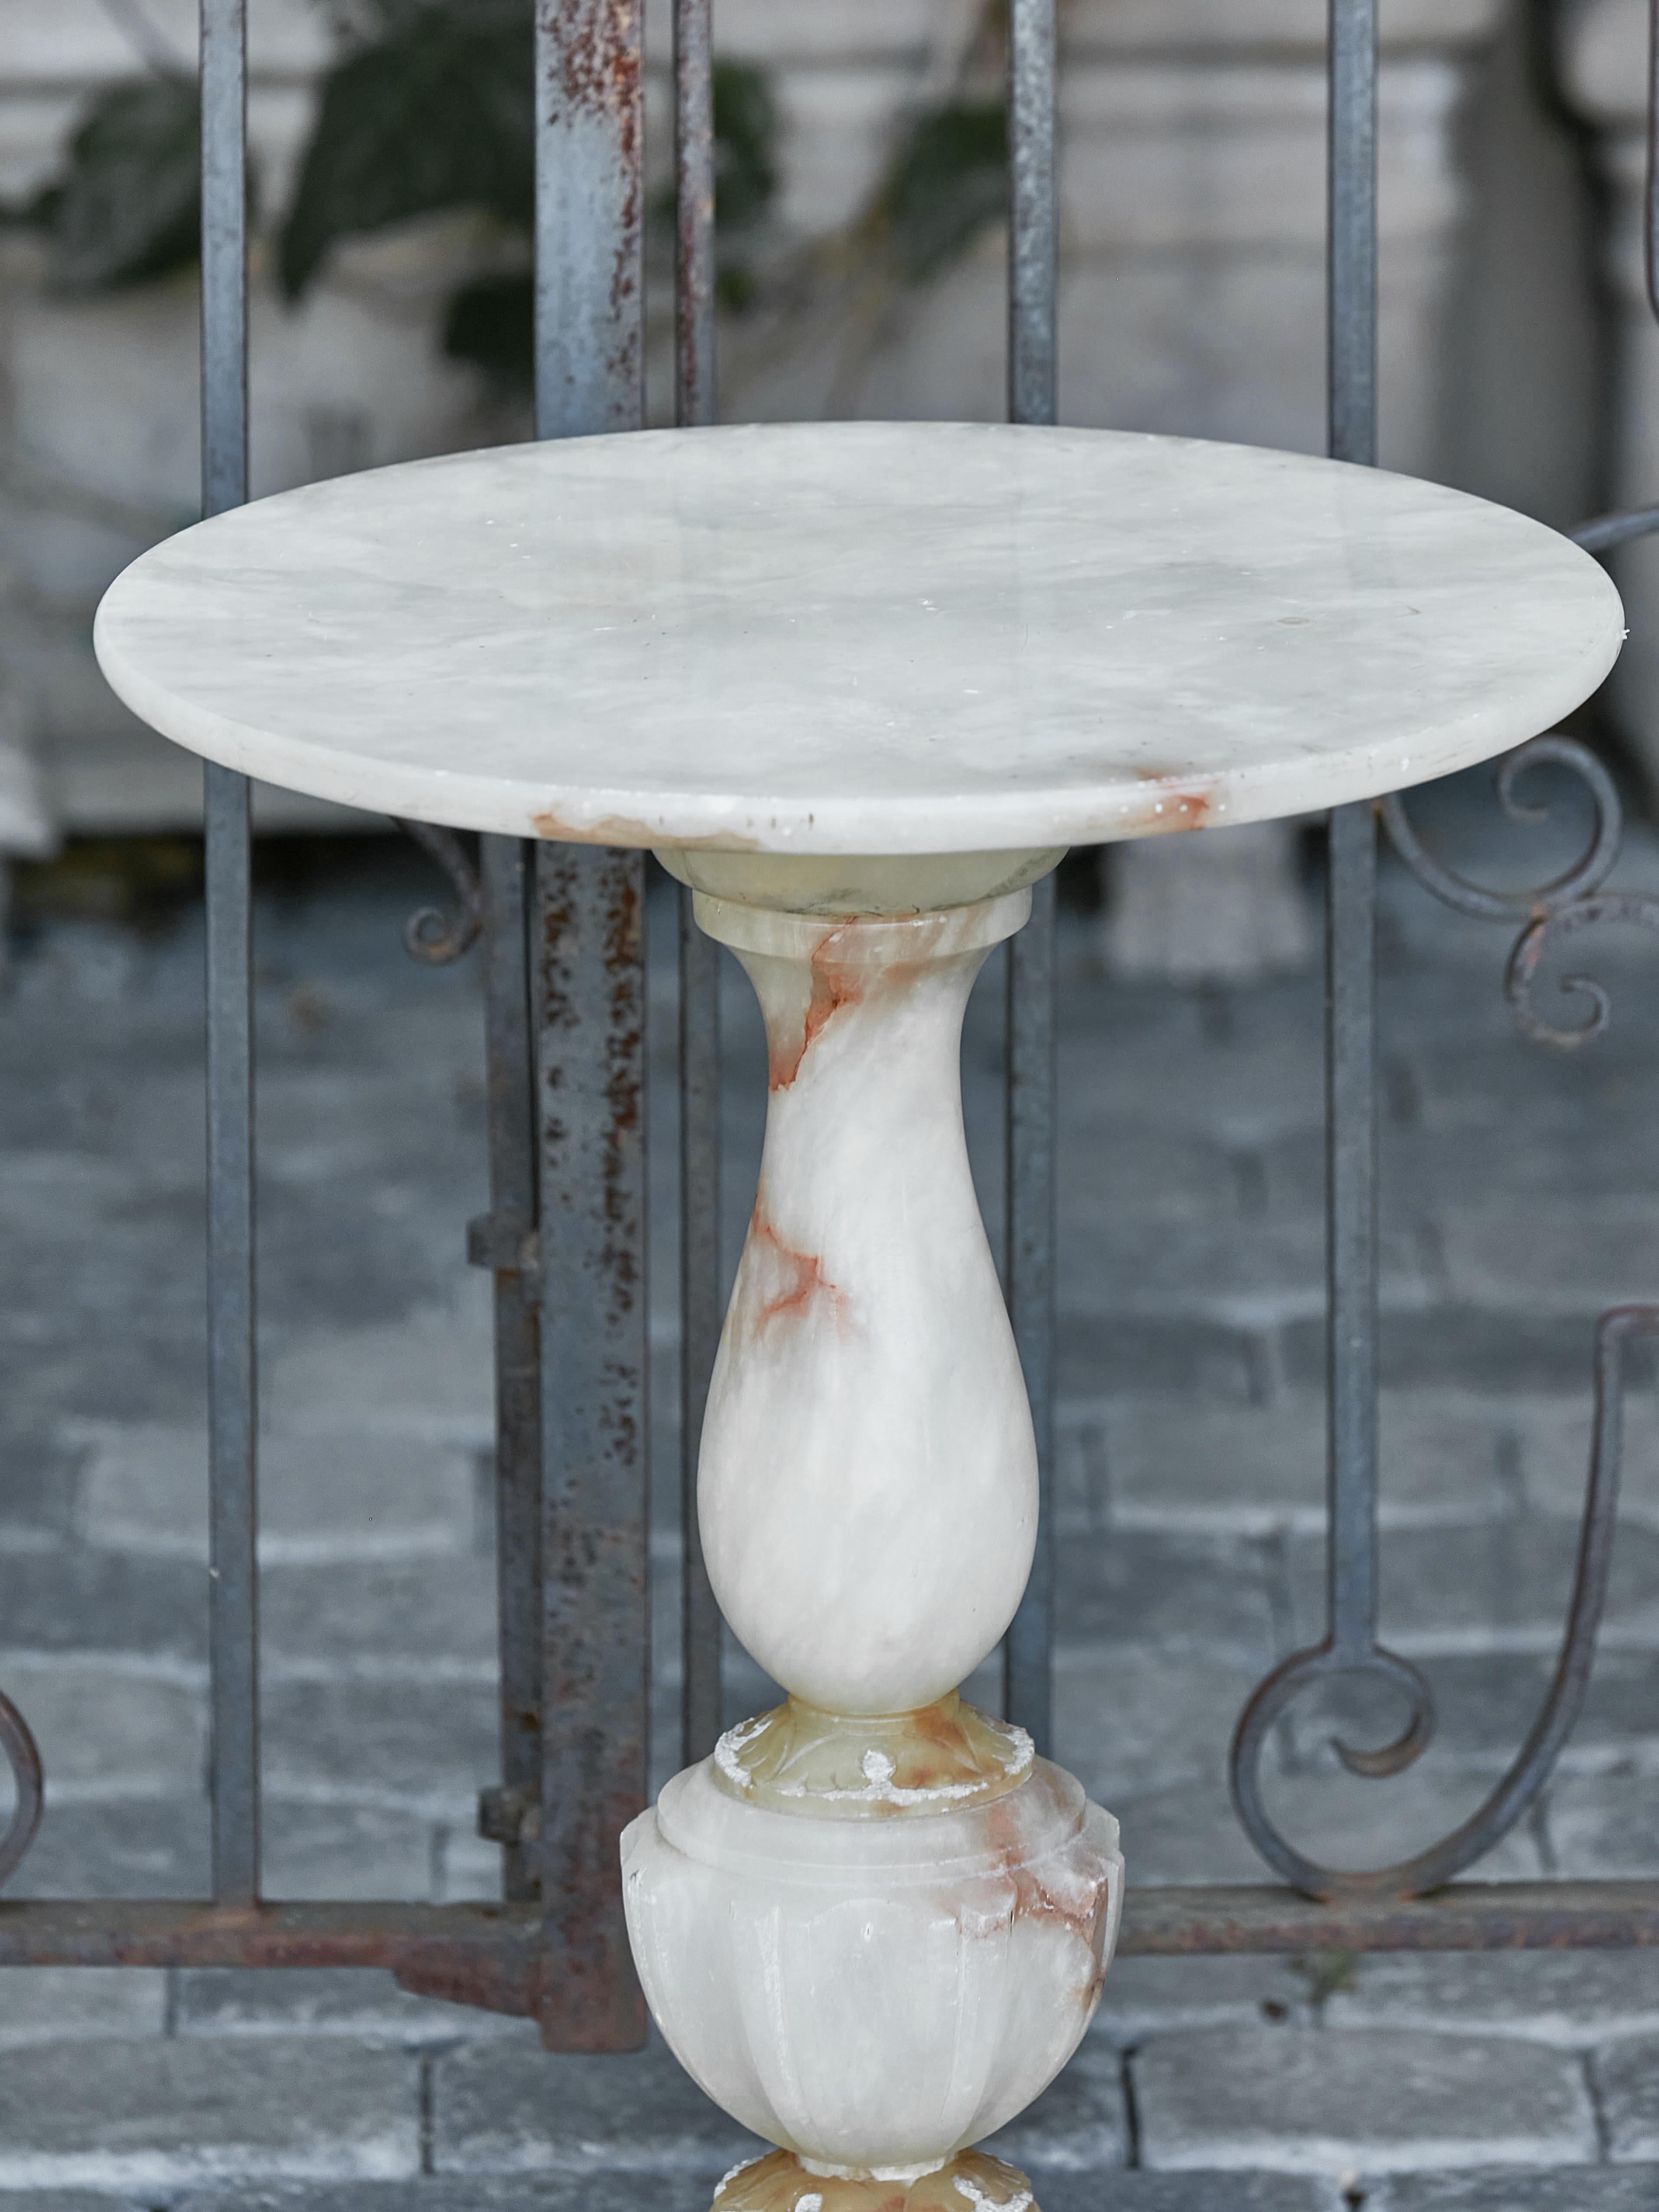 20th Century French 1920s Alabaster Guéridon Side Table with Circular Top and Pedestal Base